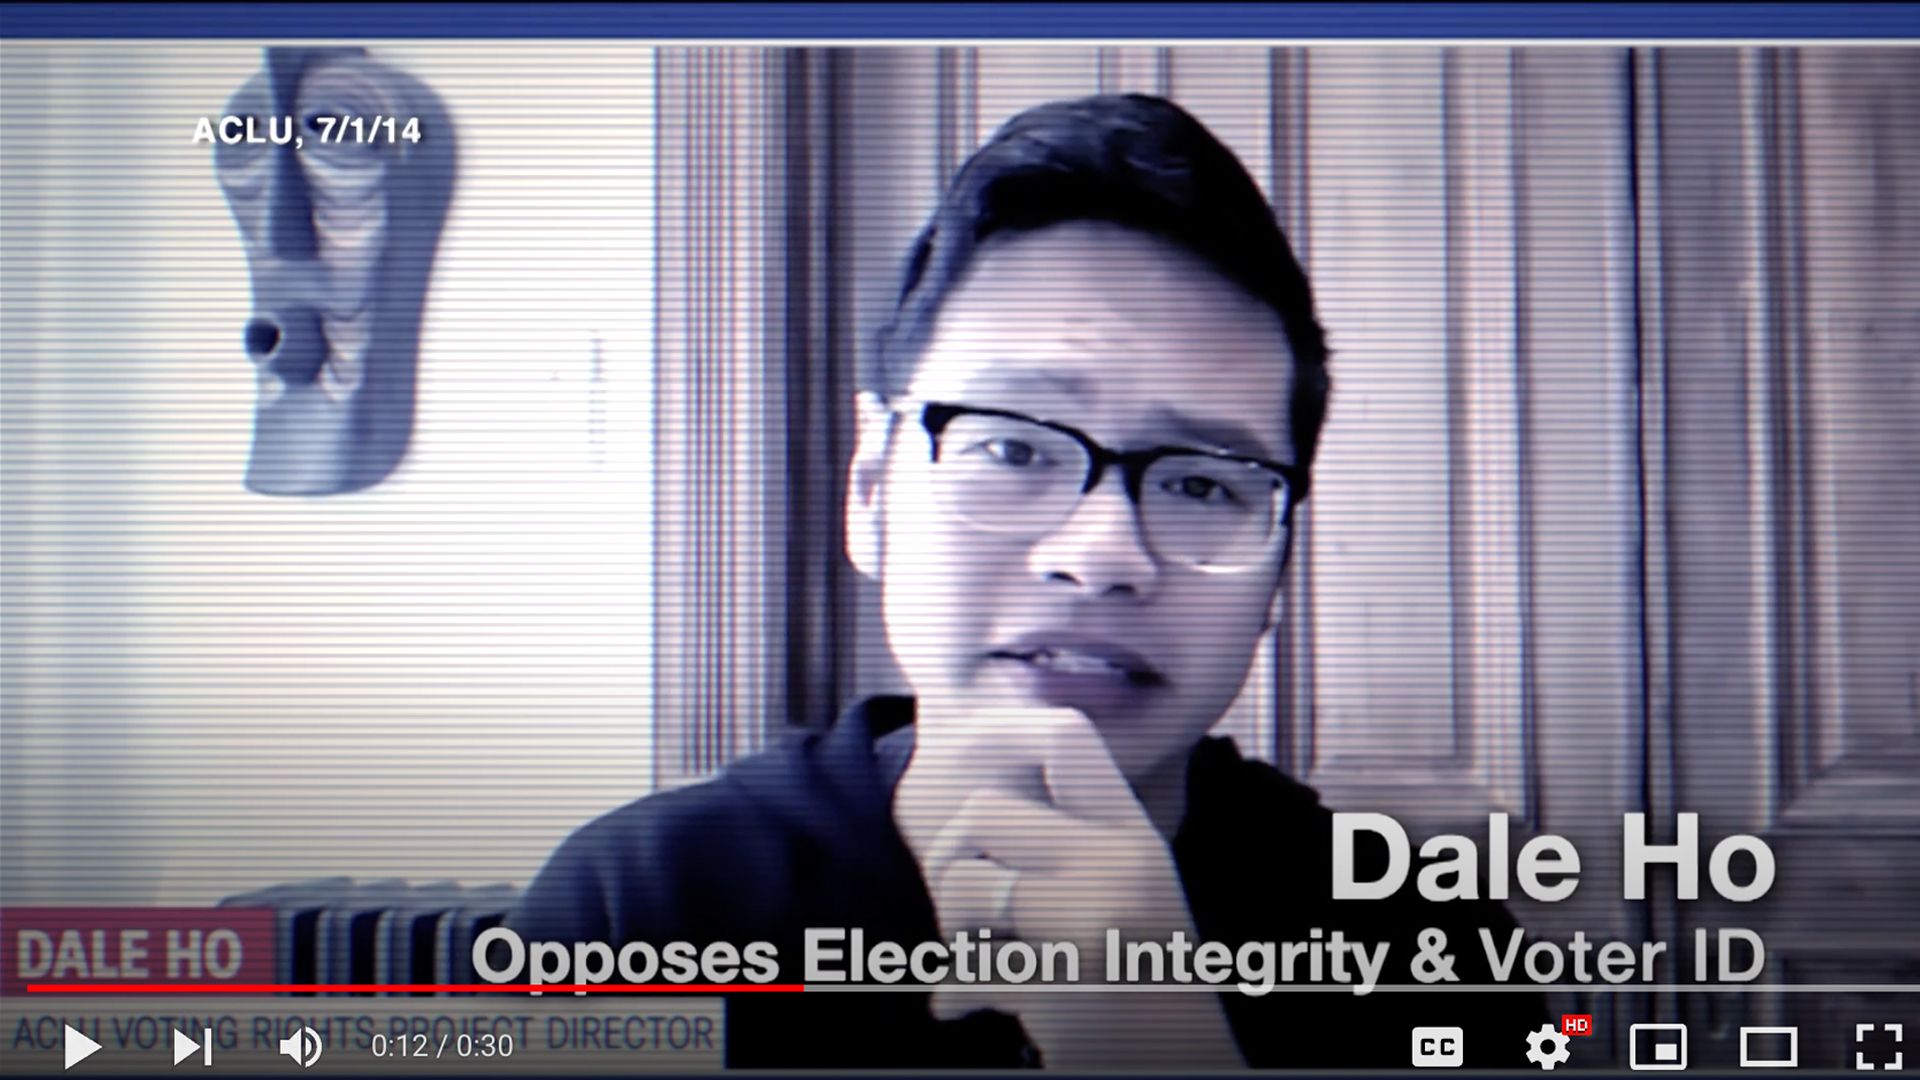 A screenshot shows a snipped from a TV ad against a Biden judicial pick, the ACLU's Dale Ho.